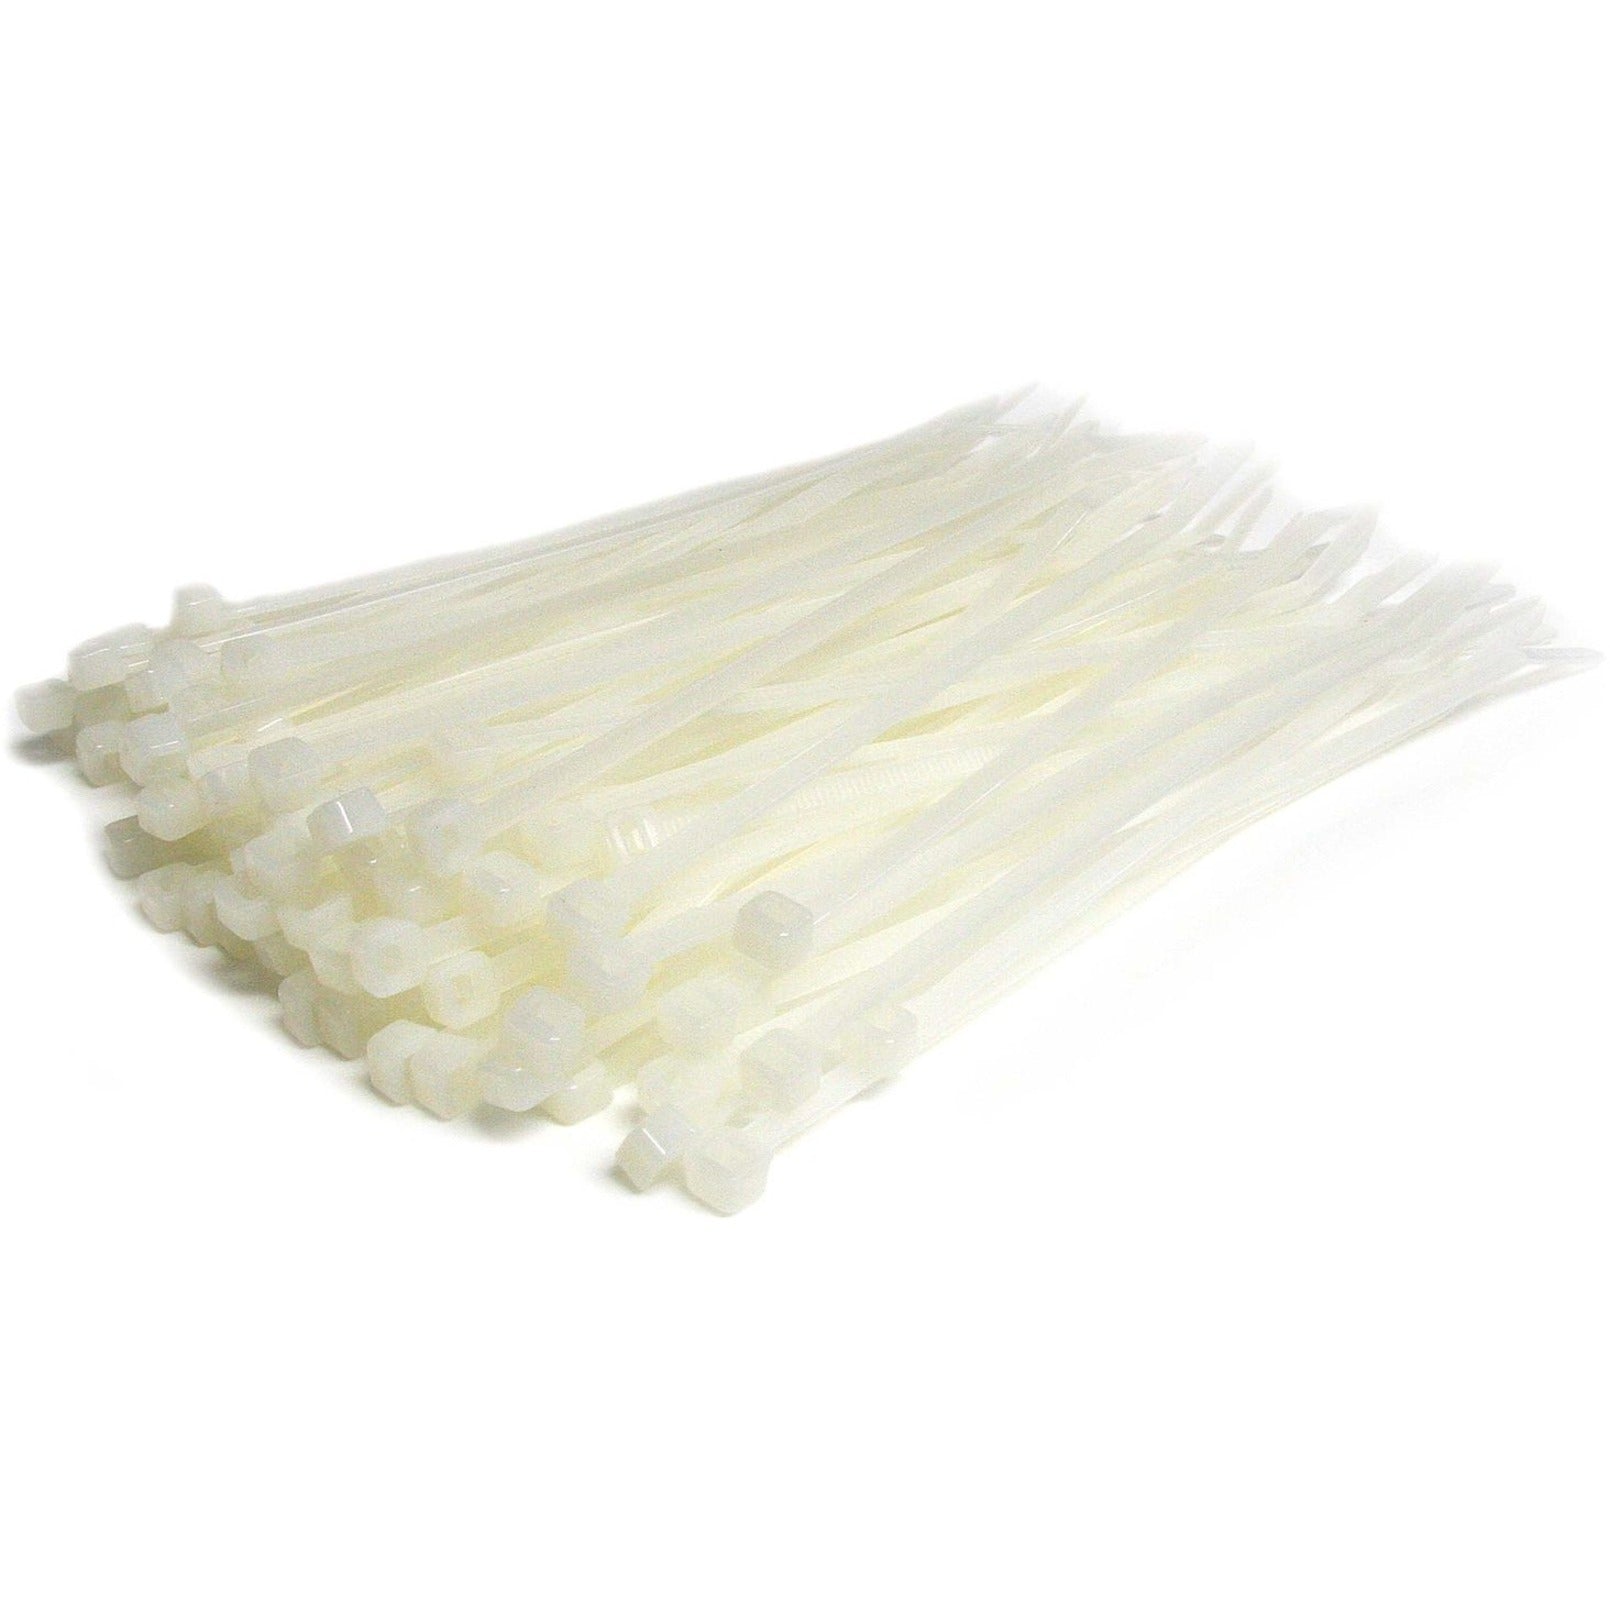 StarTech.com CV150 6in Nylon Cable Ties - Pkg of 100, TAA Compliant, RoHS & REACH Certified